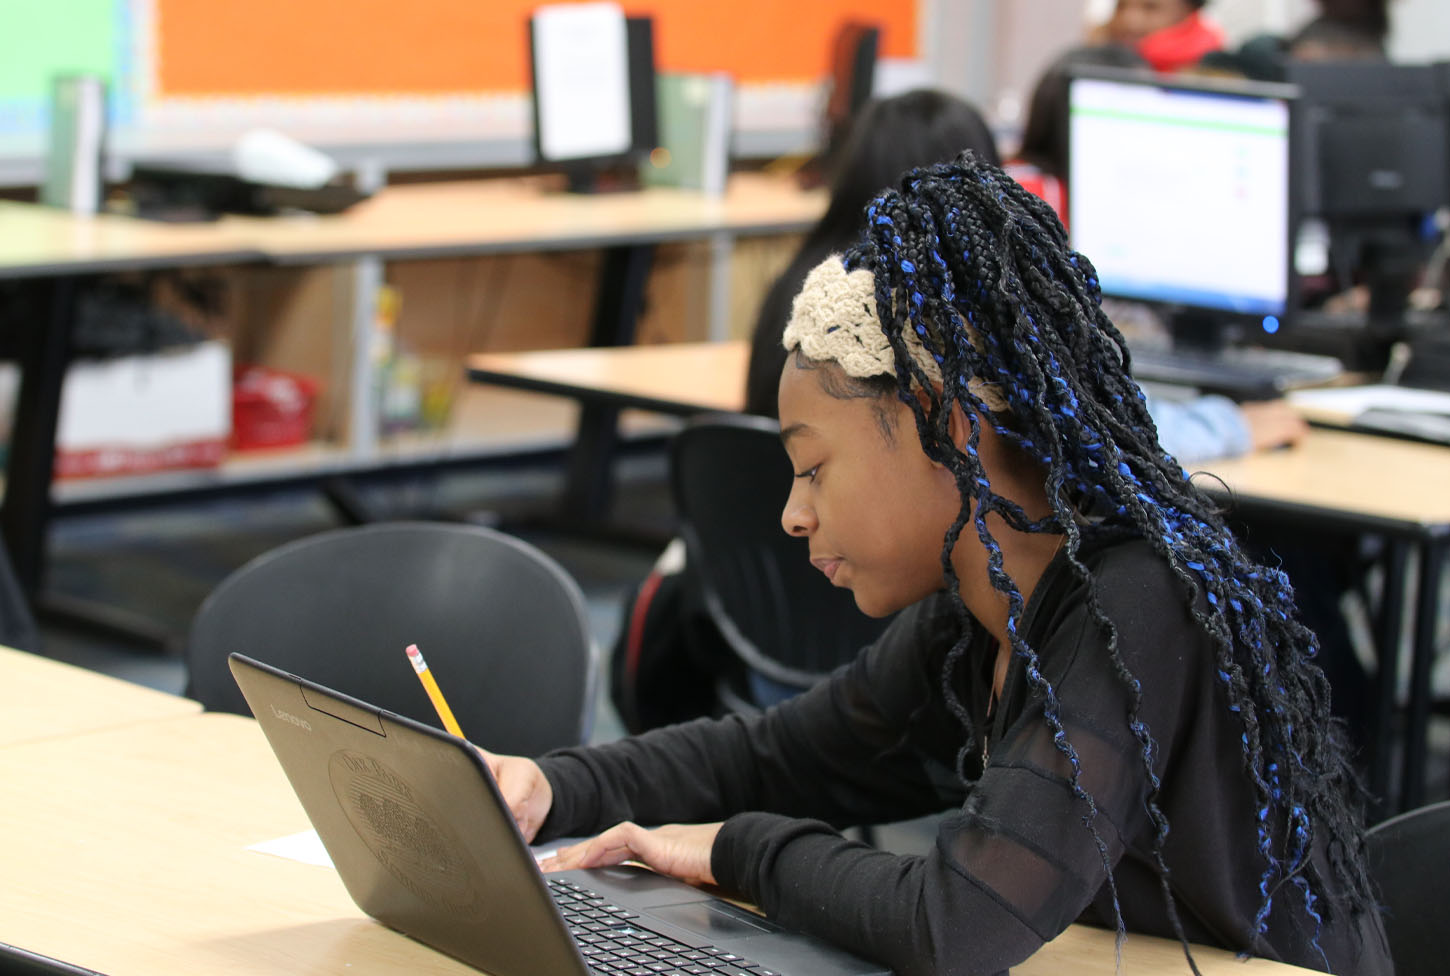 Female student studying using a laptop